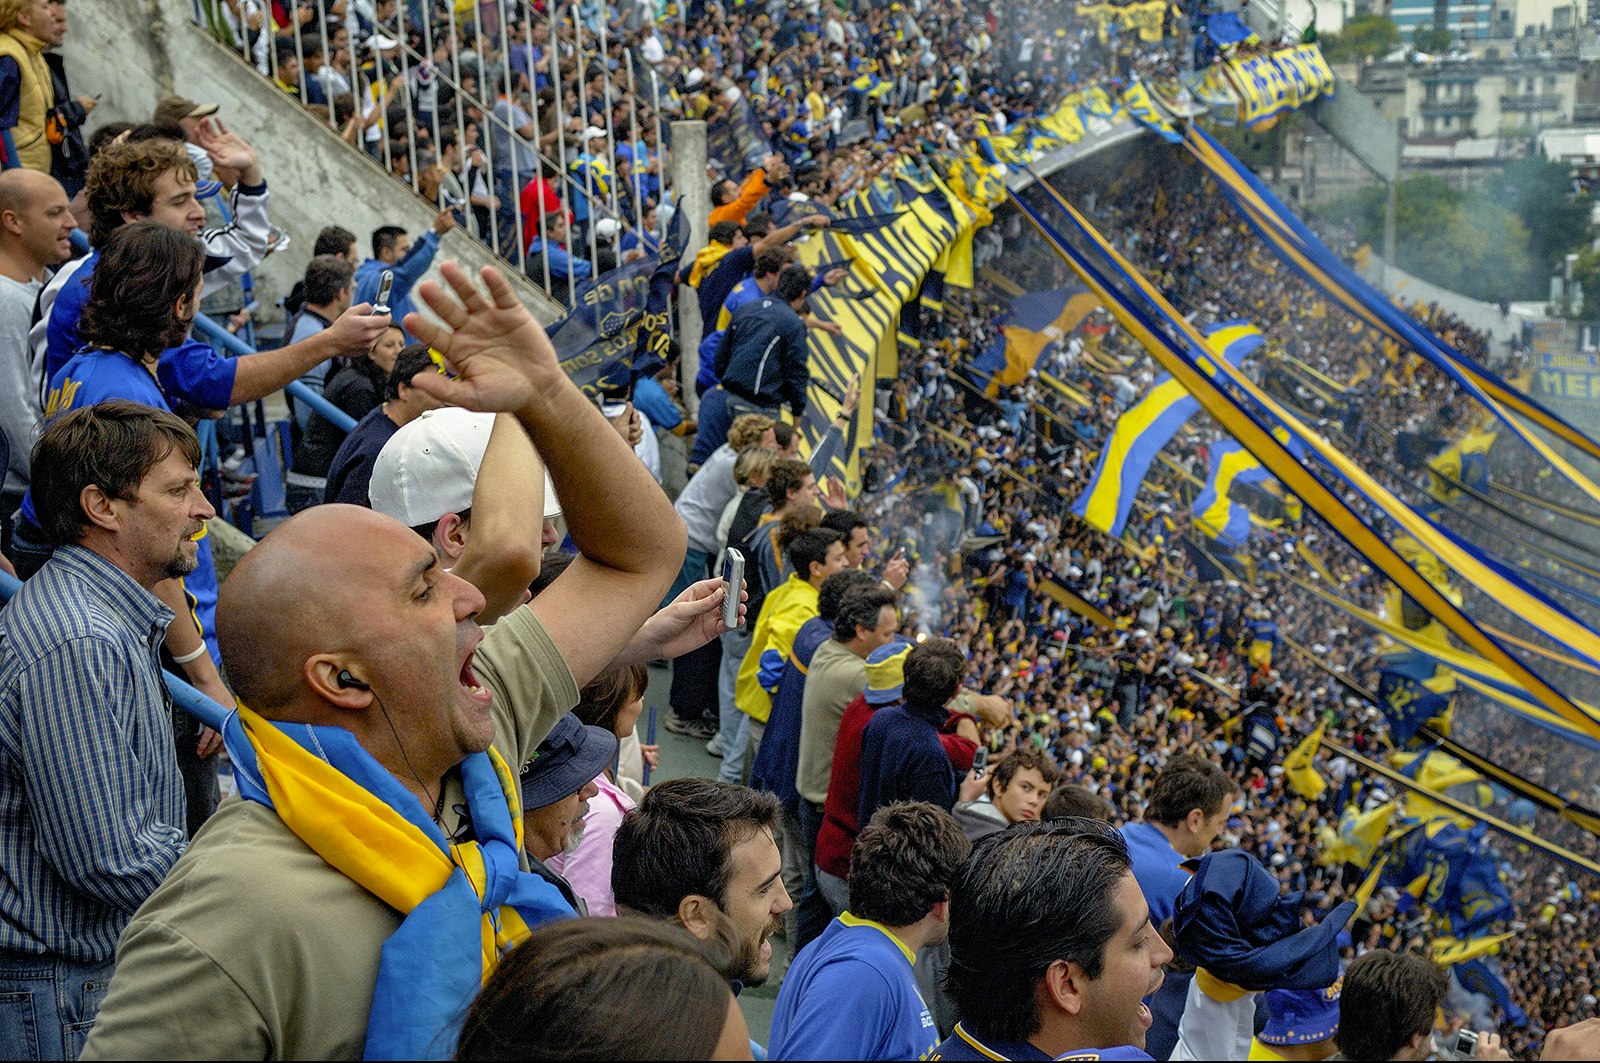 Fans dressed in blue and yellow cheering for their team at La Bombonera Stadium in Buenos Aires, Argentina